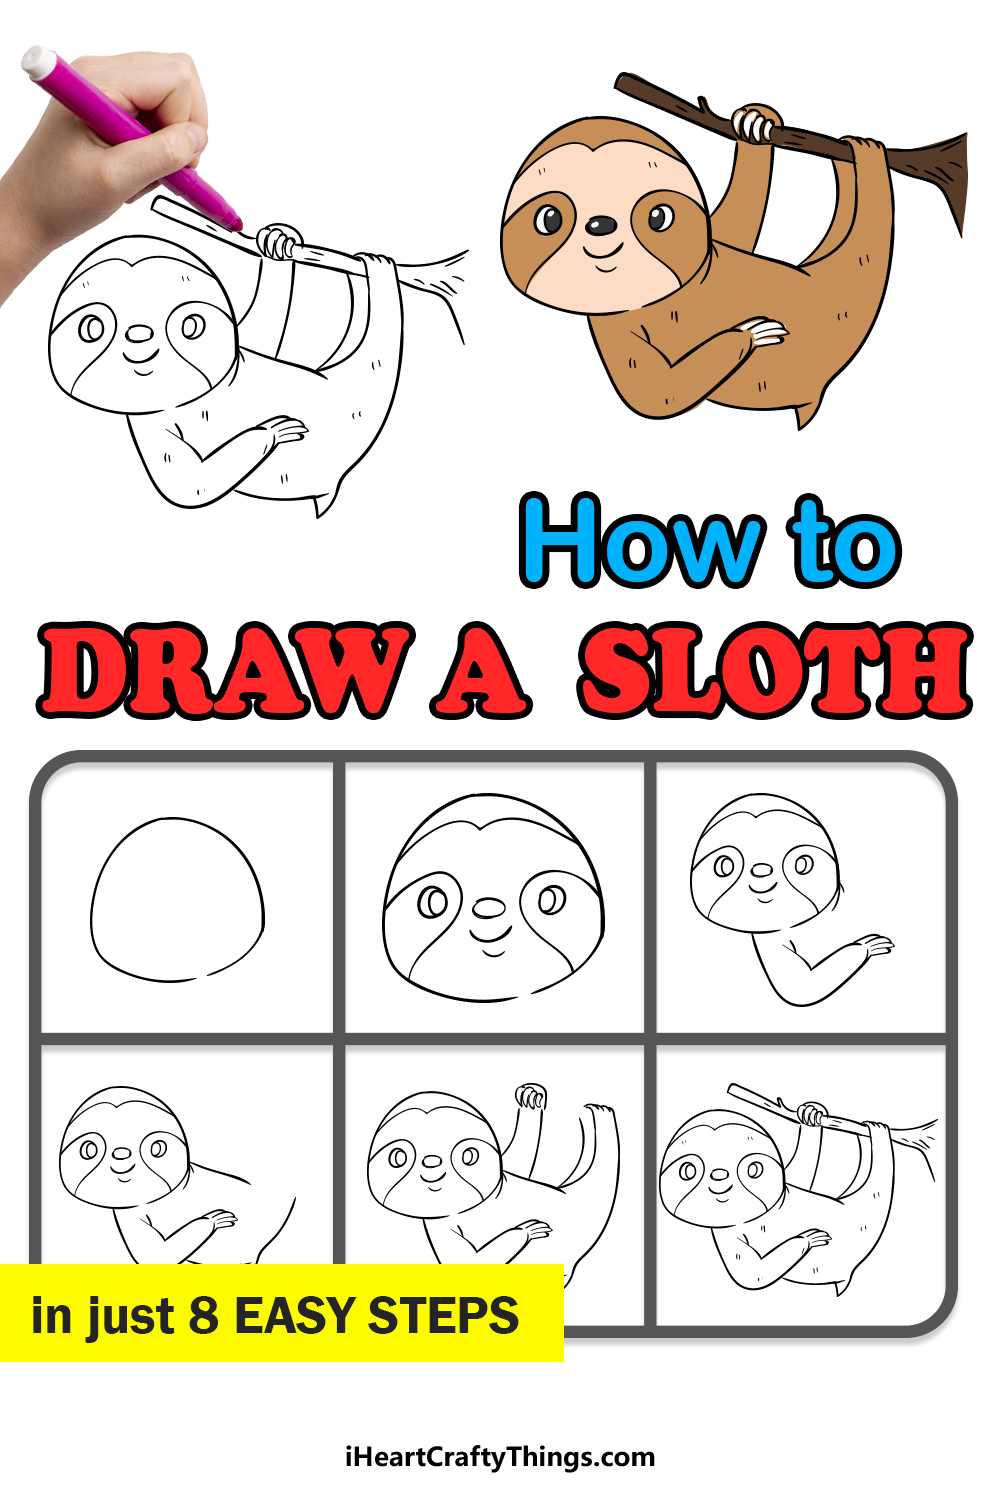 how to draw a sloth in 8 easy steps